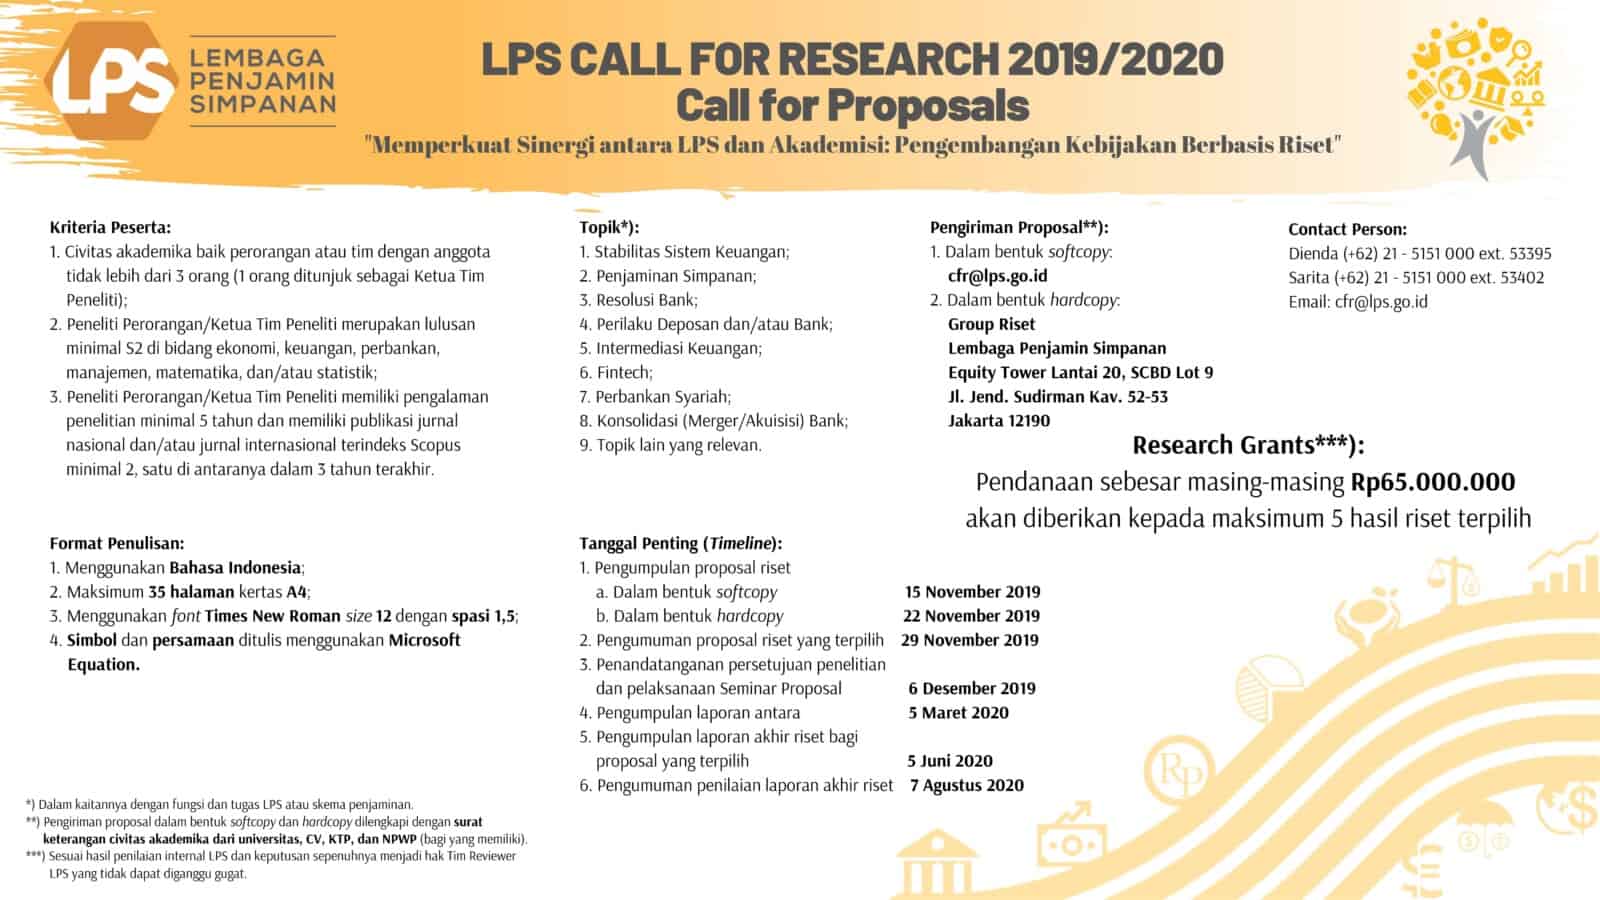 LPS Call for Research 2019/2020